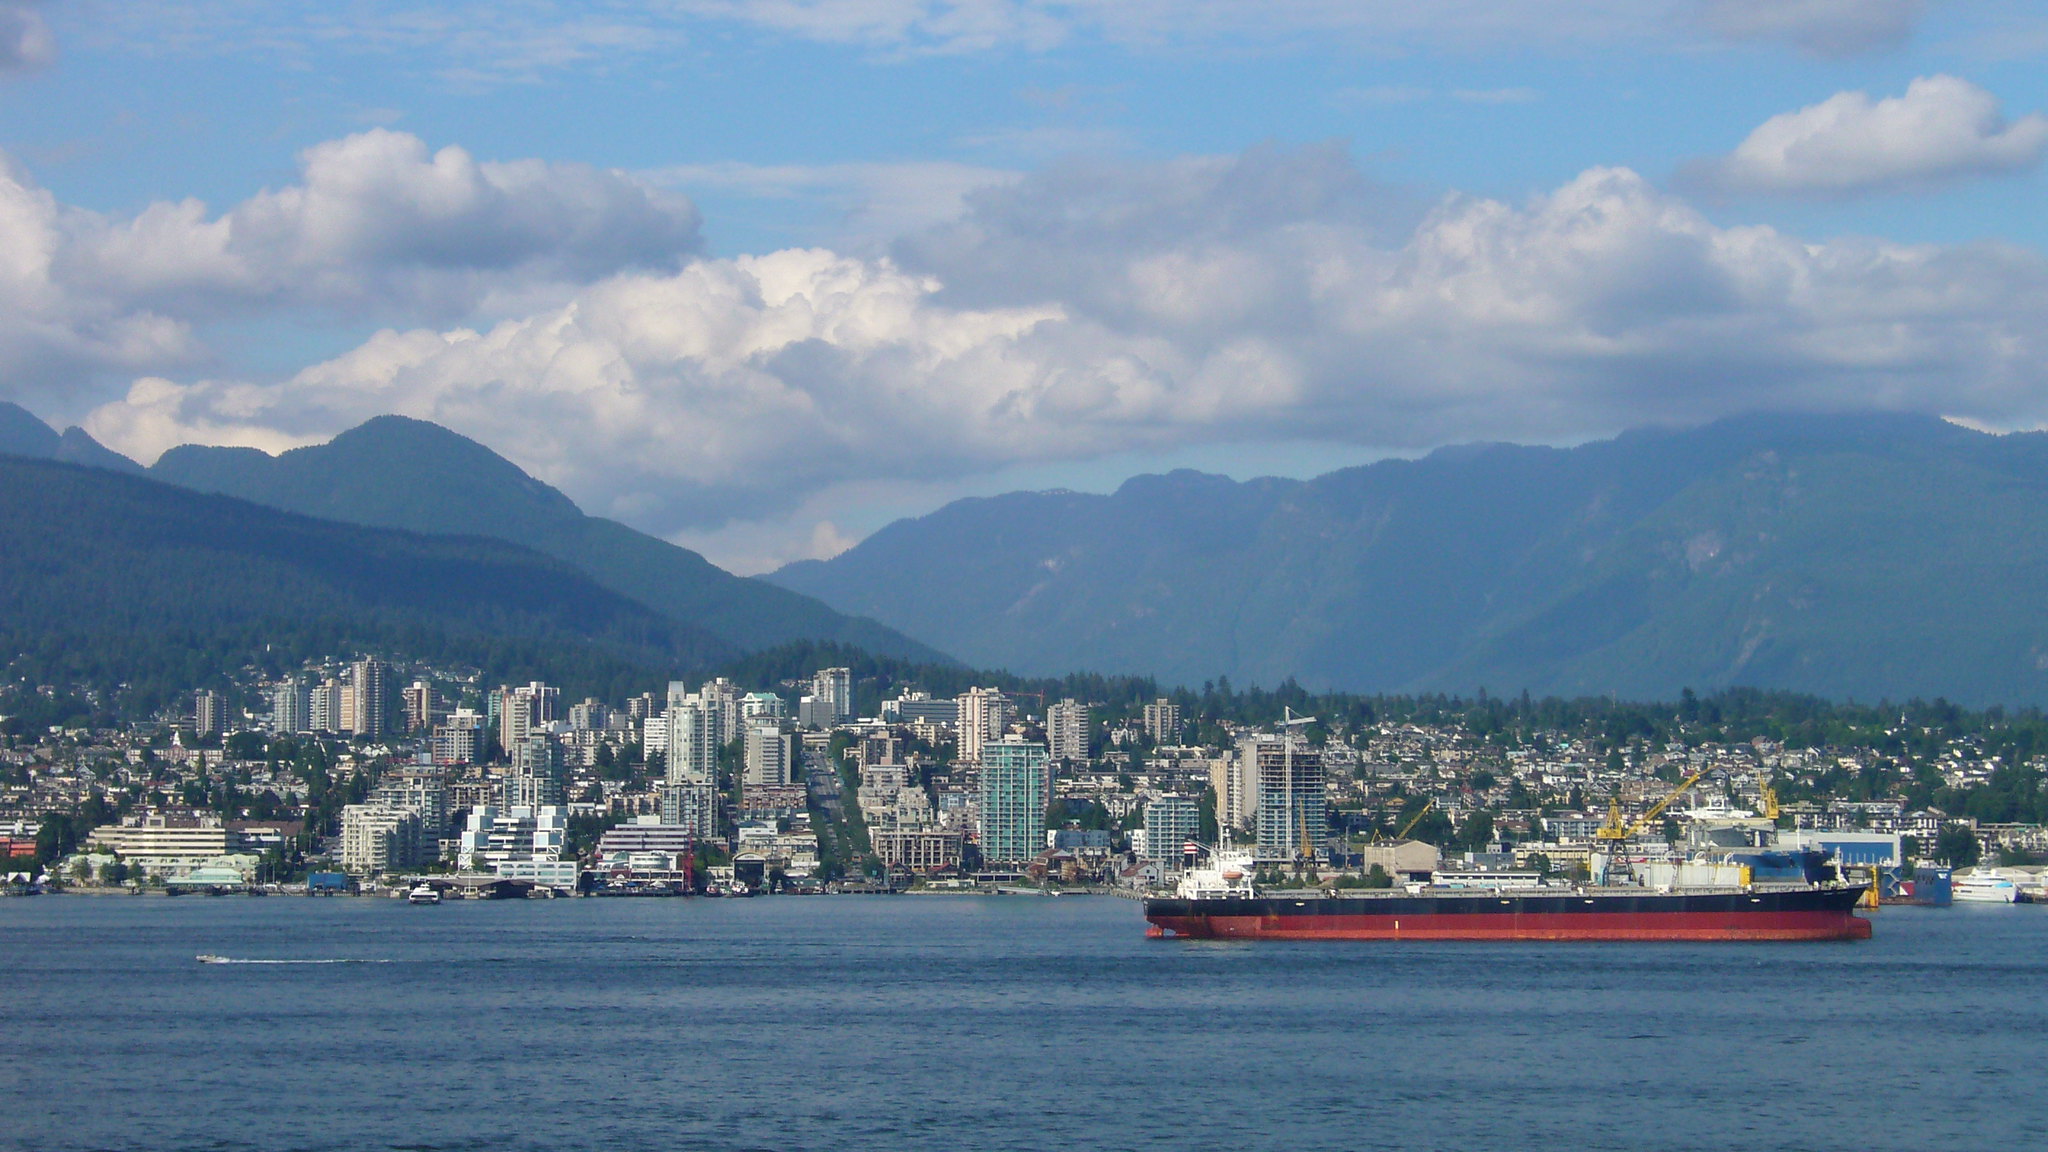 View of West Vancouver across the water from Vancouver